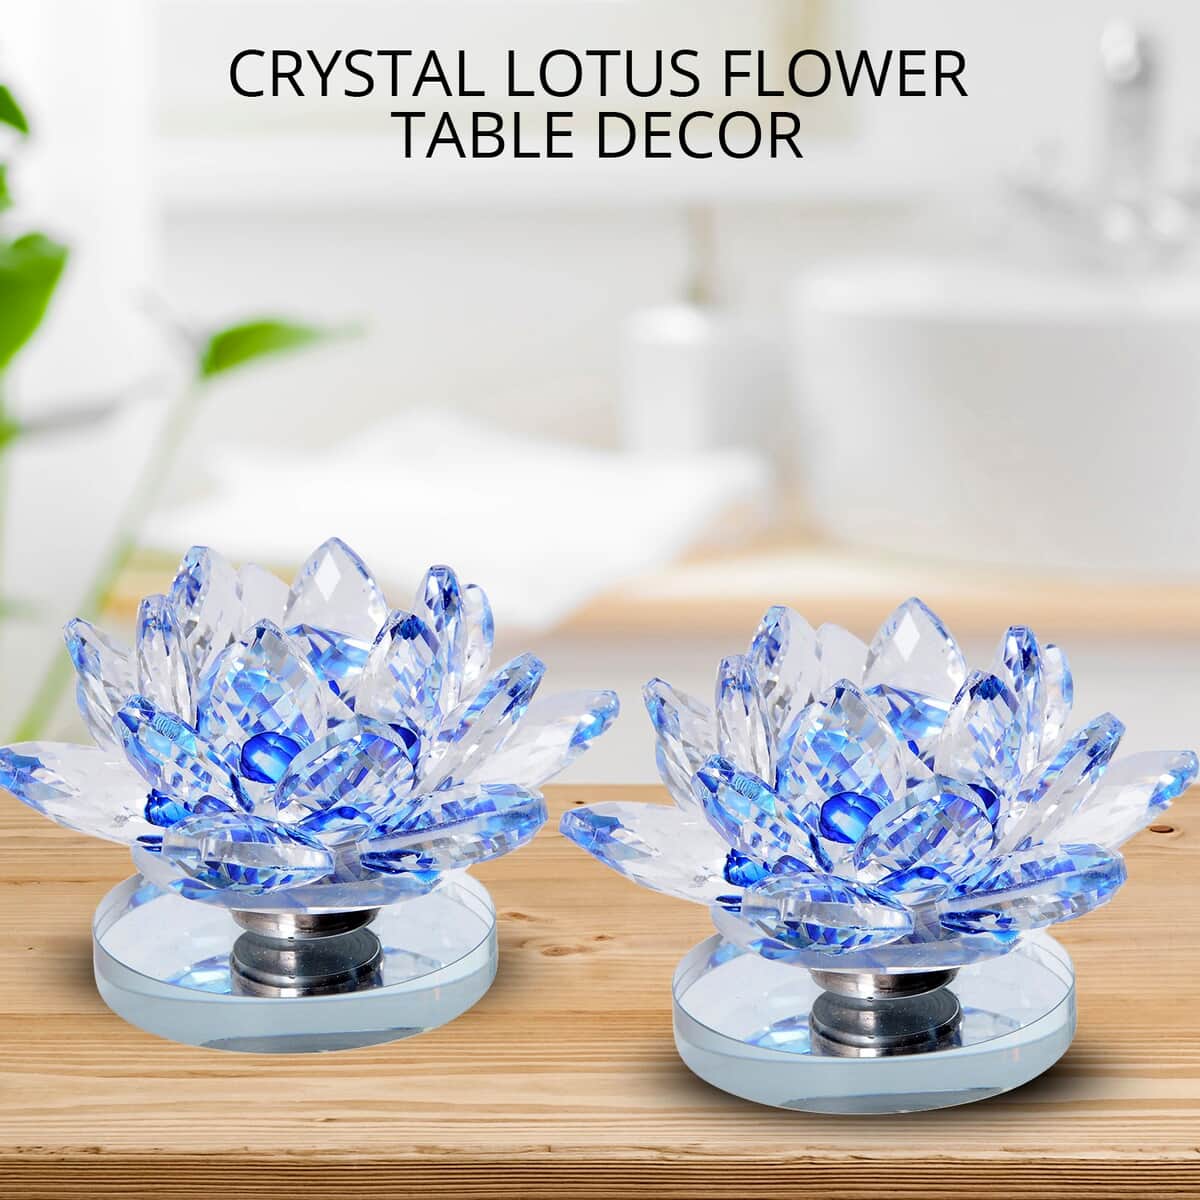 Set of 2 Blue Crystal Lotus Flower with Rotating Base Sculpted Decorations Gifts Box Case for Room Home Kitchen Table Decor, Home Decoration Items Gifts Decorative Showpiece image number 1